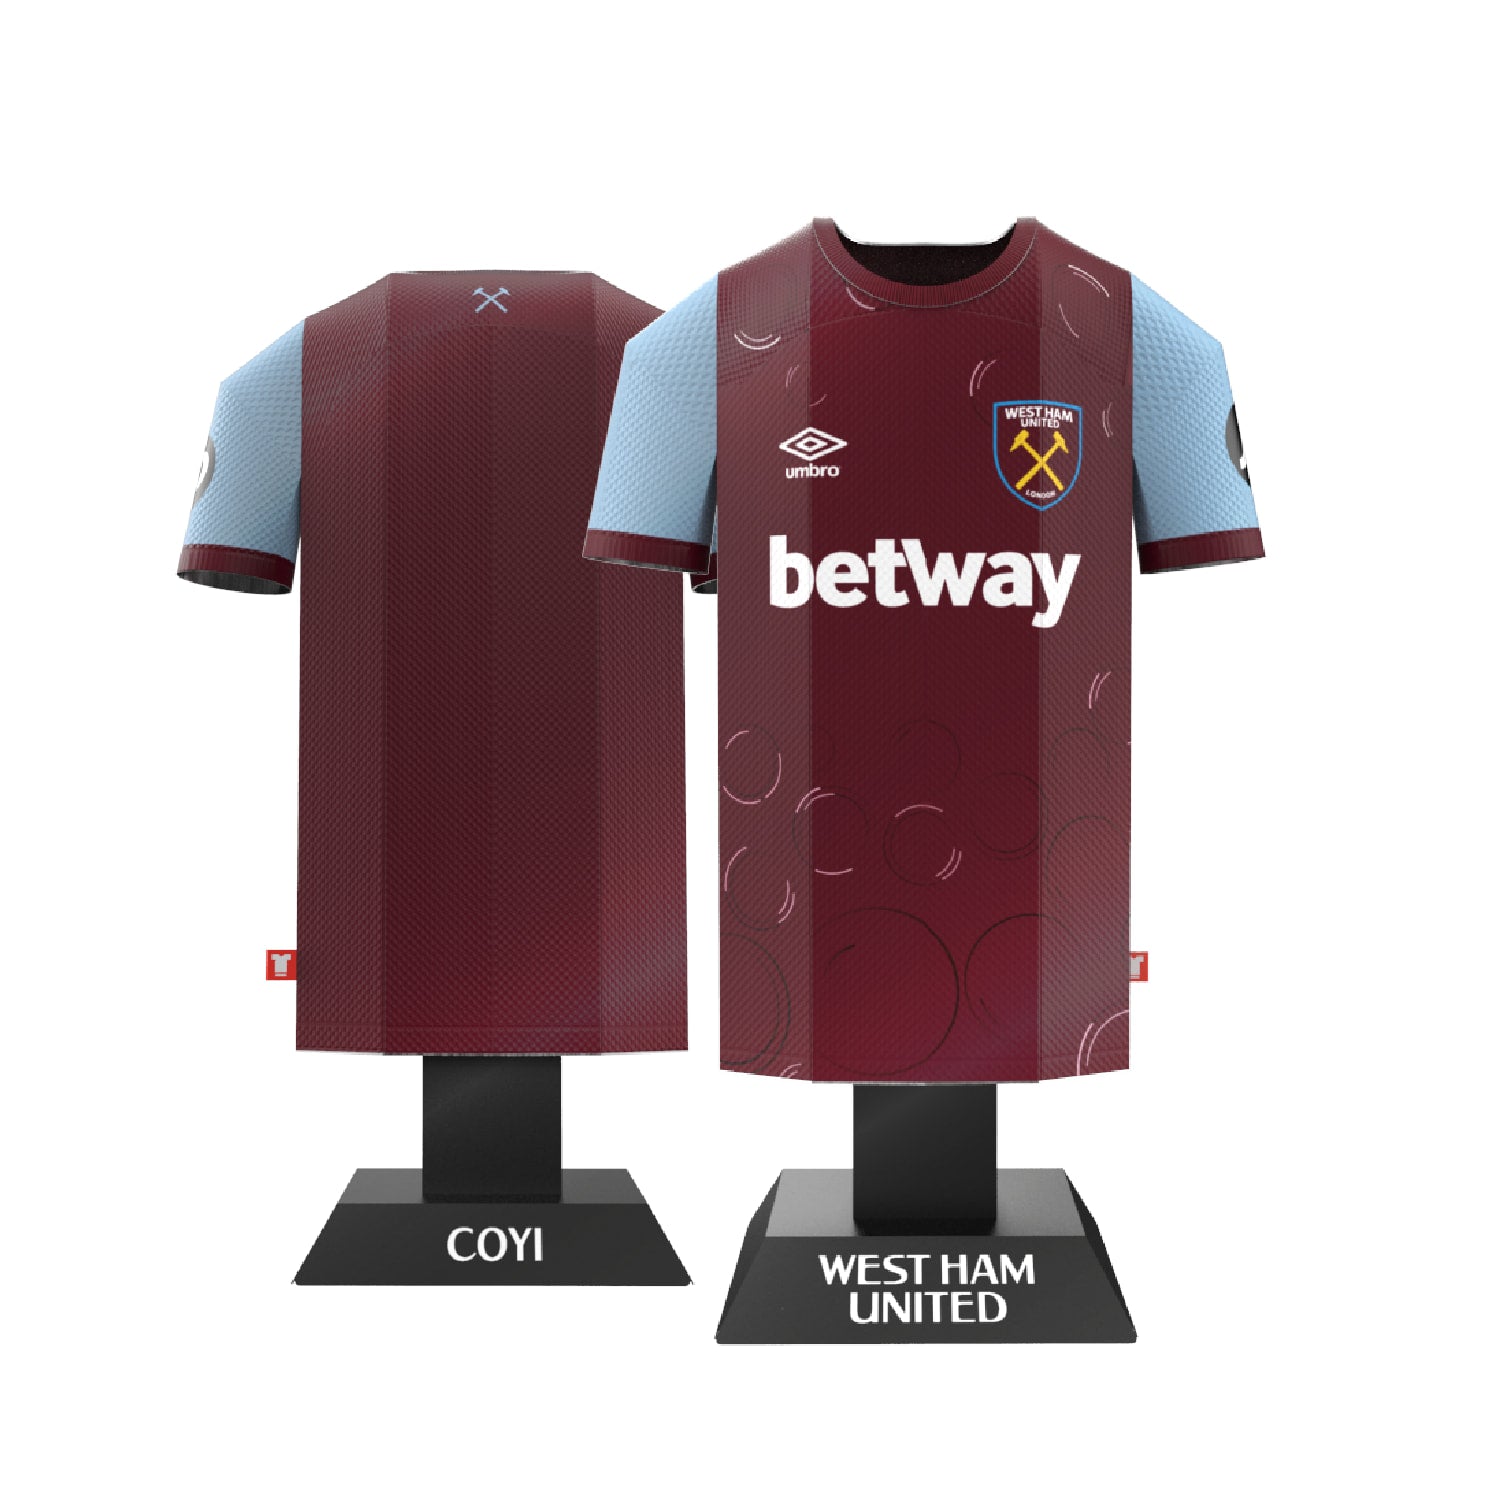 West ham shirt front and back